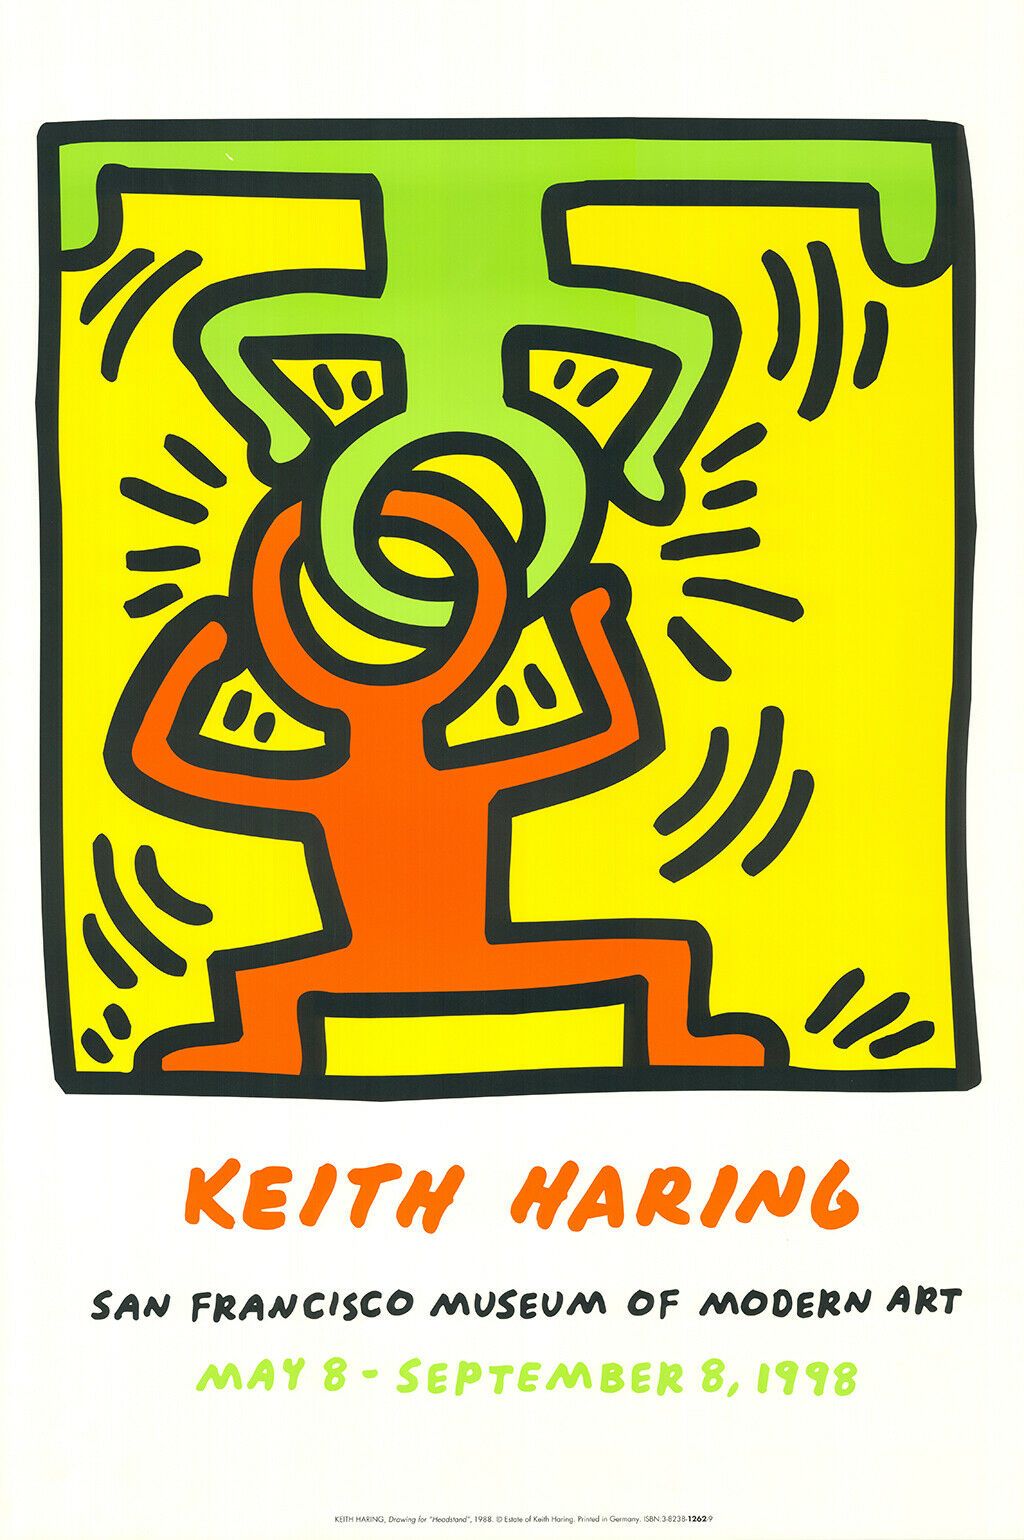 KEITH HARING Keith Haring (1958 - 1990)

(d'après)

Impression offset sur papier&hellip;